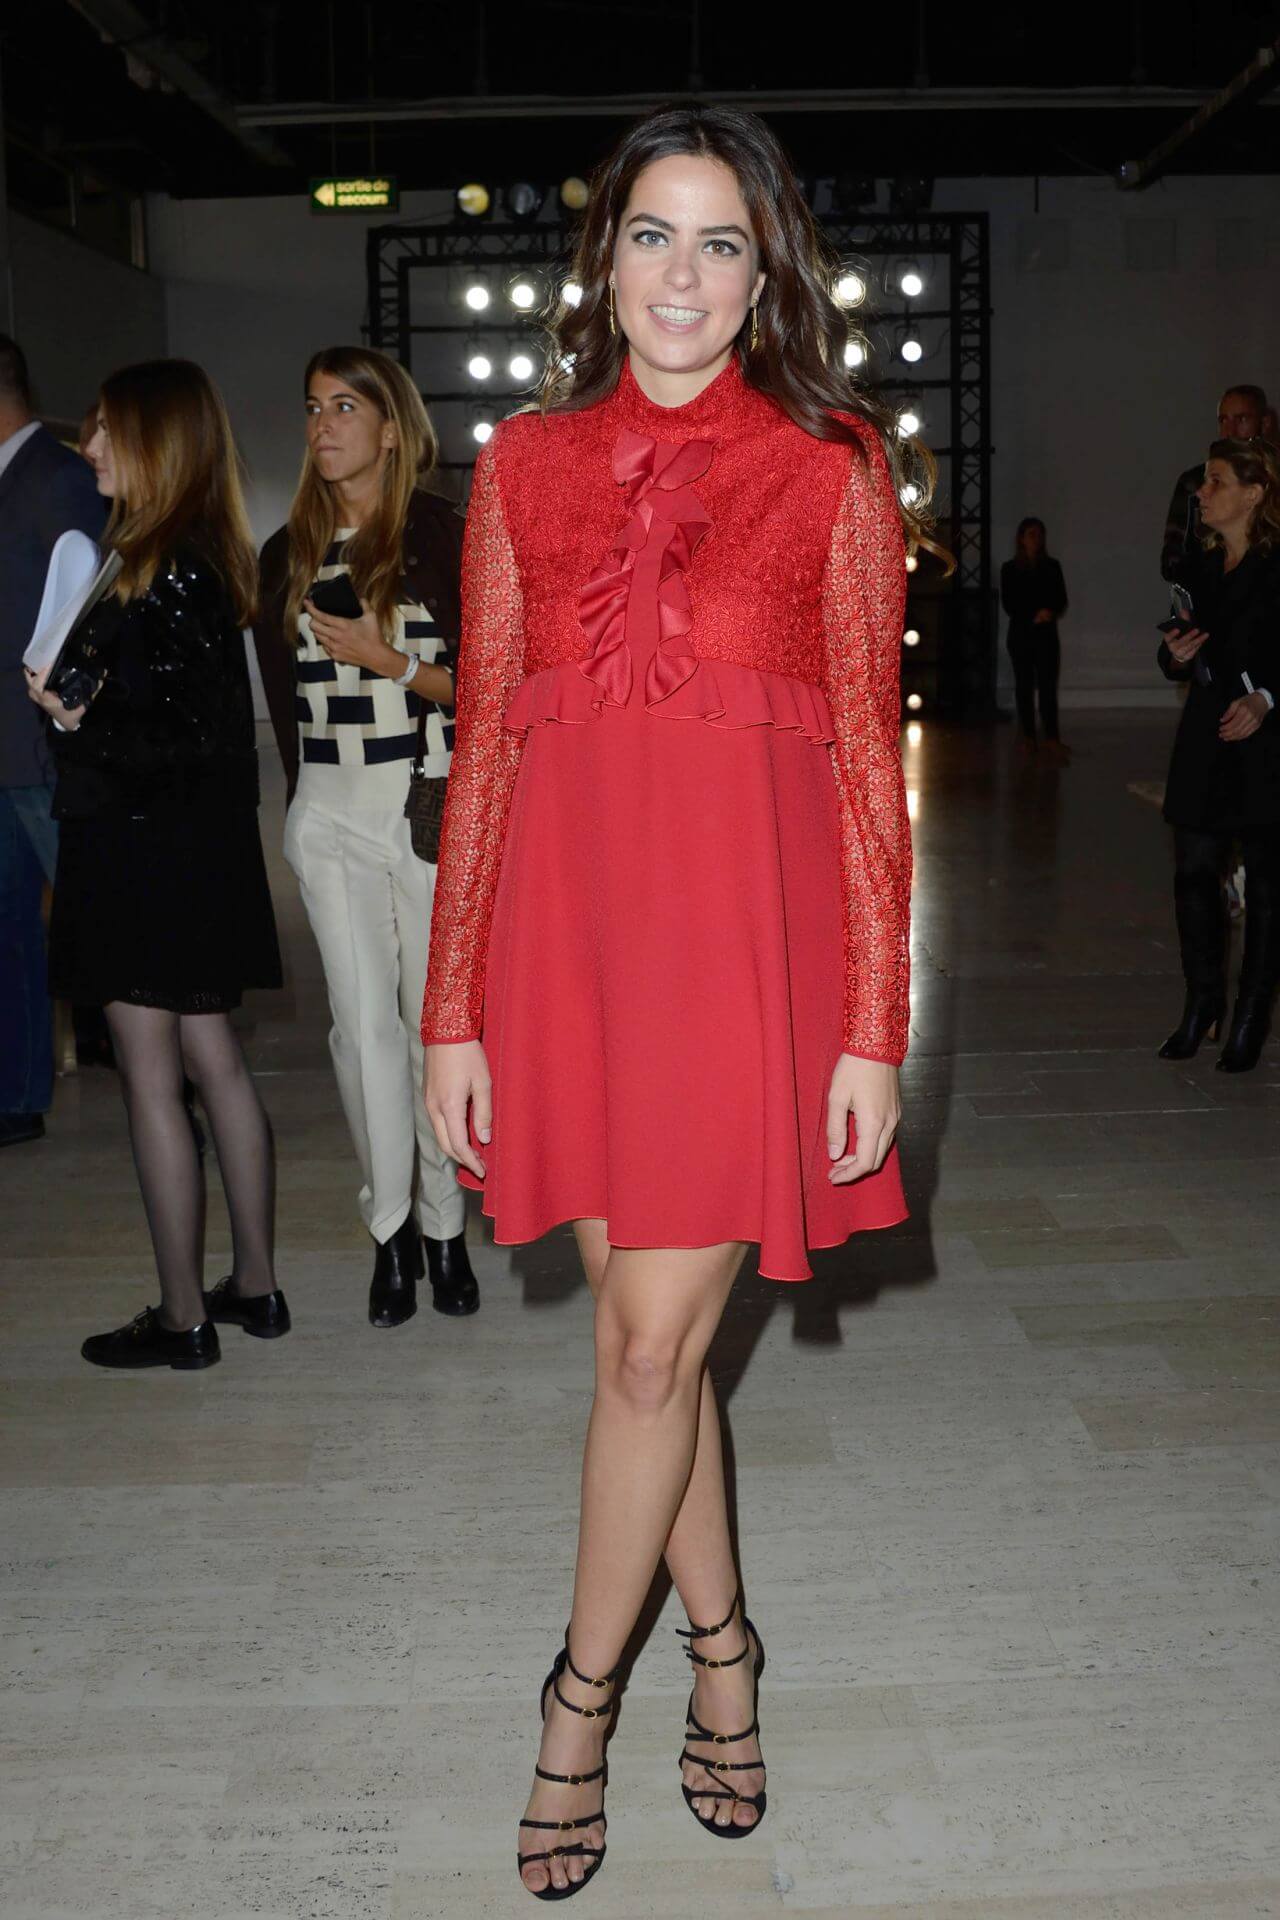 Anouchka Delon In Red Lace Design Net Sleeves Short Gown At Giambattista Valli Show in Paris